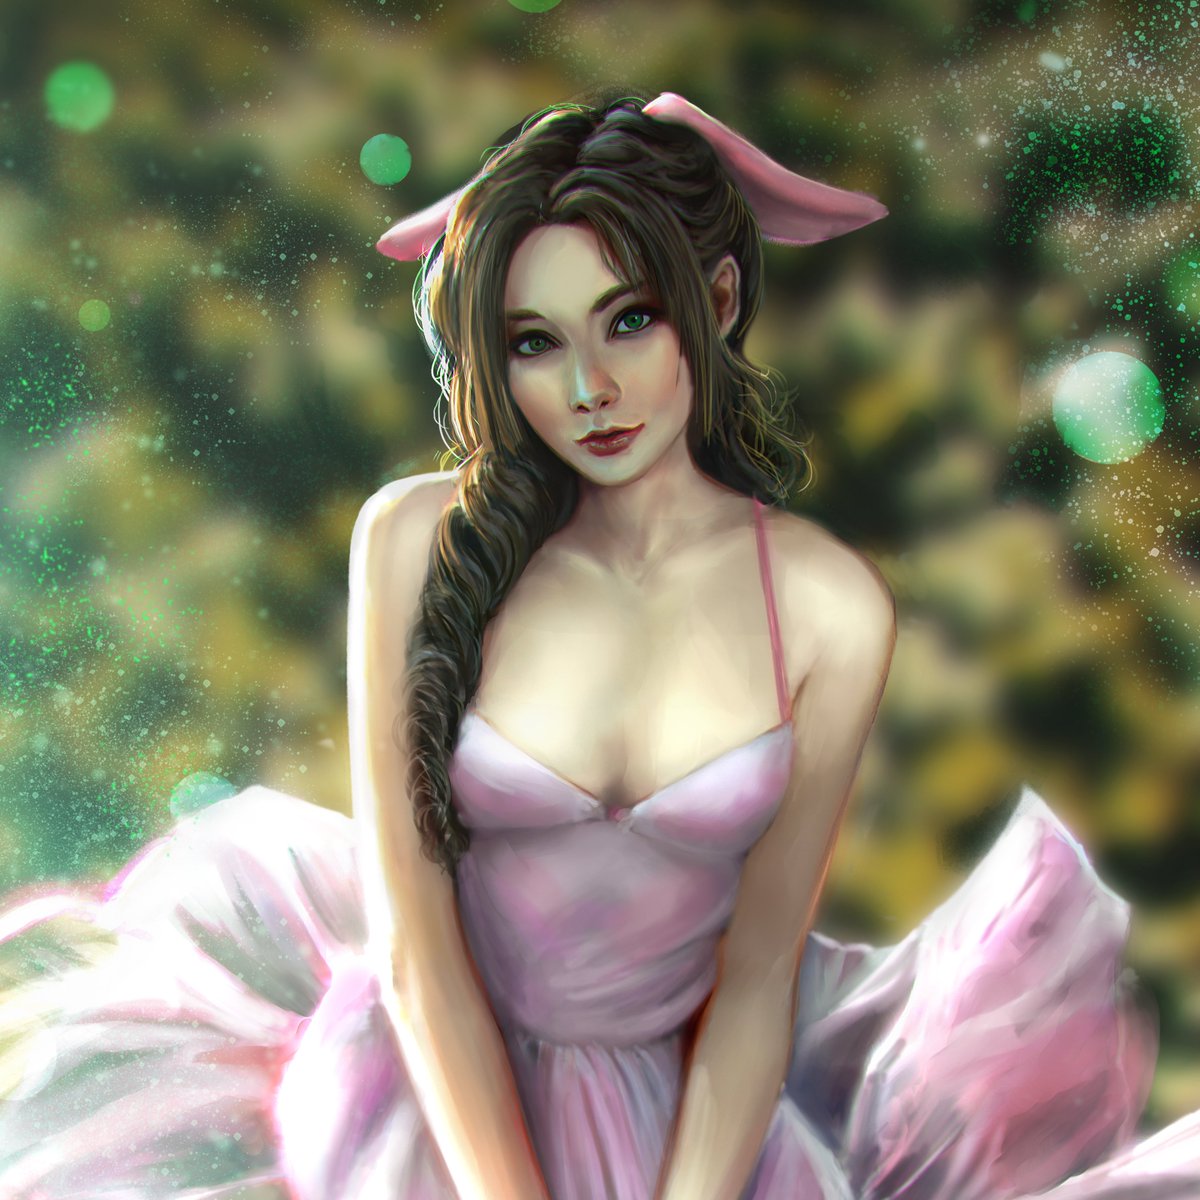 Aerith Girl. Started this a couple months ago as a study and then somehow i gave up on it. Today i felt like finish it.
#ff7 #aerith #color #memorystudy #lightandcolor #fanart #digital